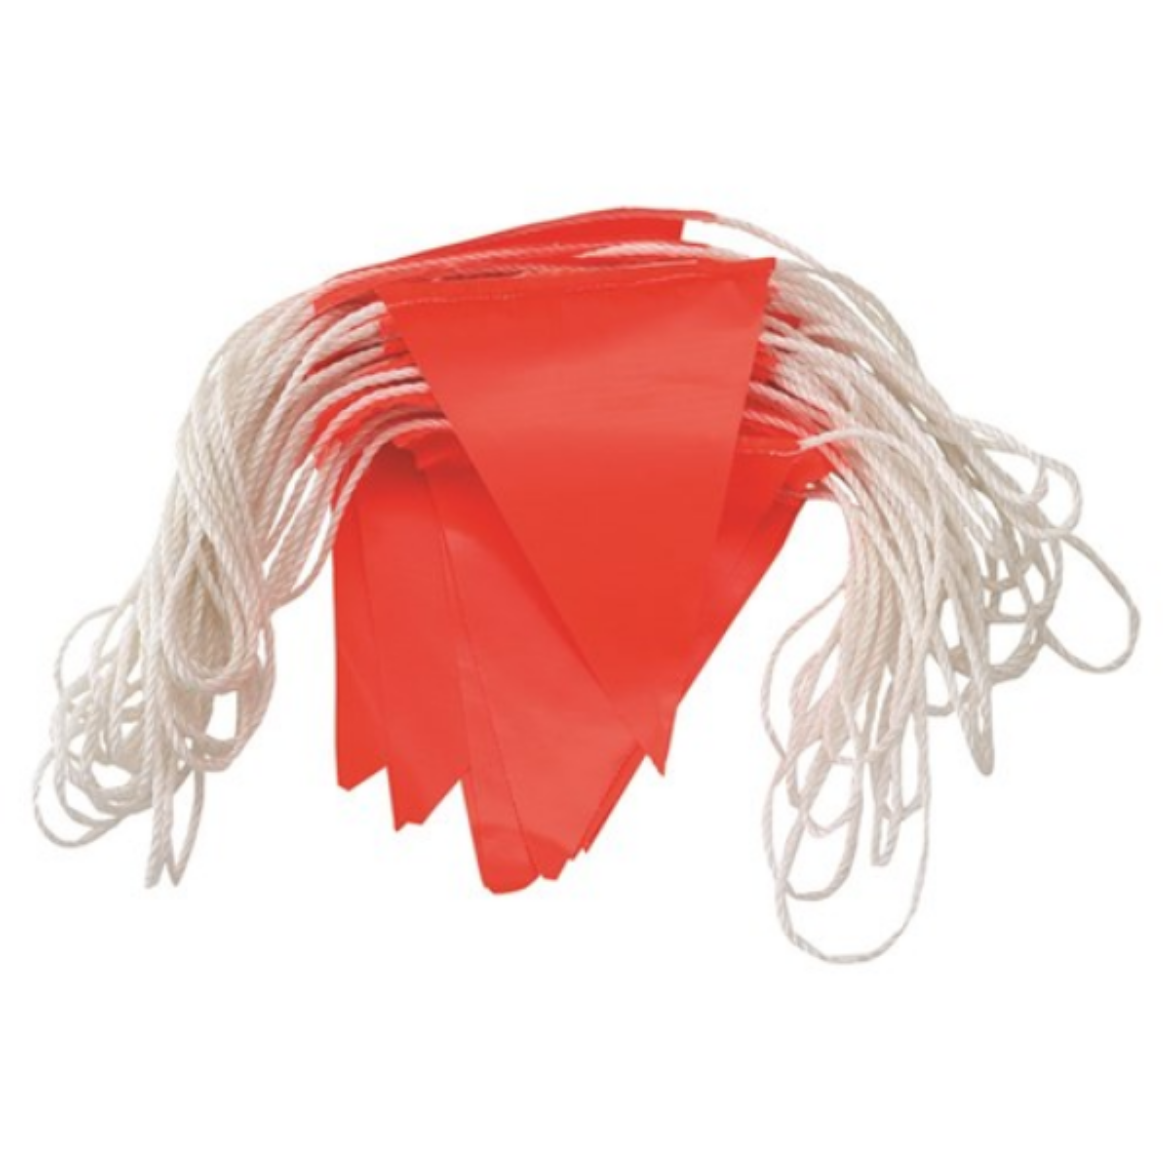 Picture of ORANGE PVC FLAG BUNTING - DAY USE, ORANGE FLAGS - 30M